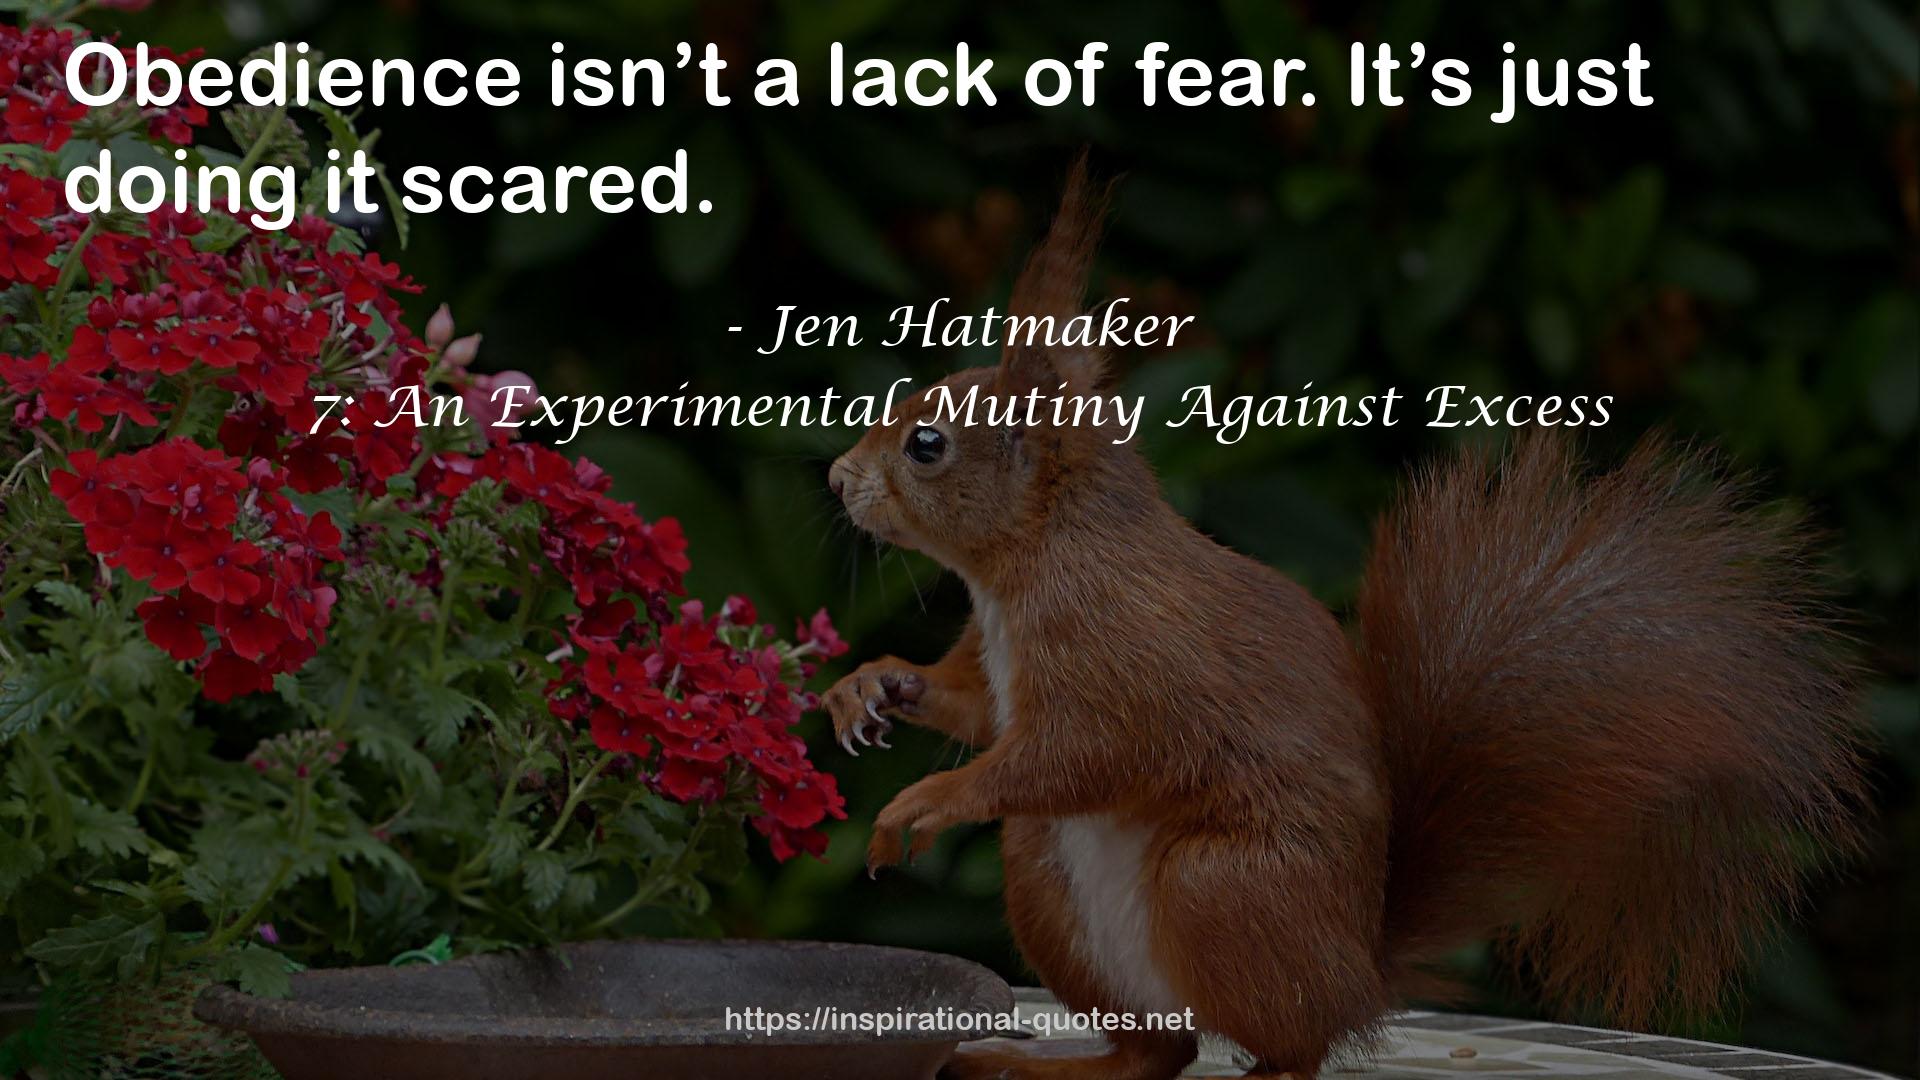 7: An Experimental Mutiny Against Excess QUOTES